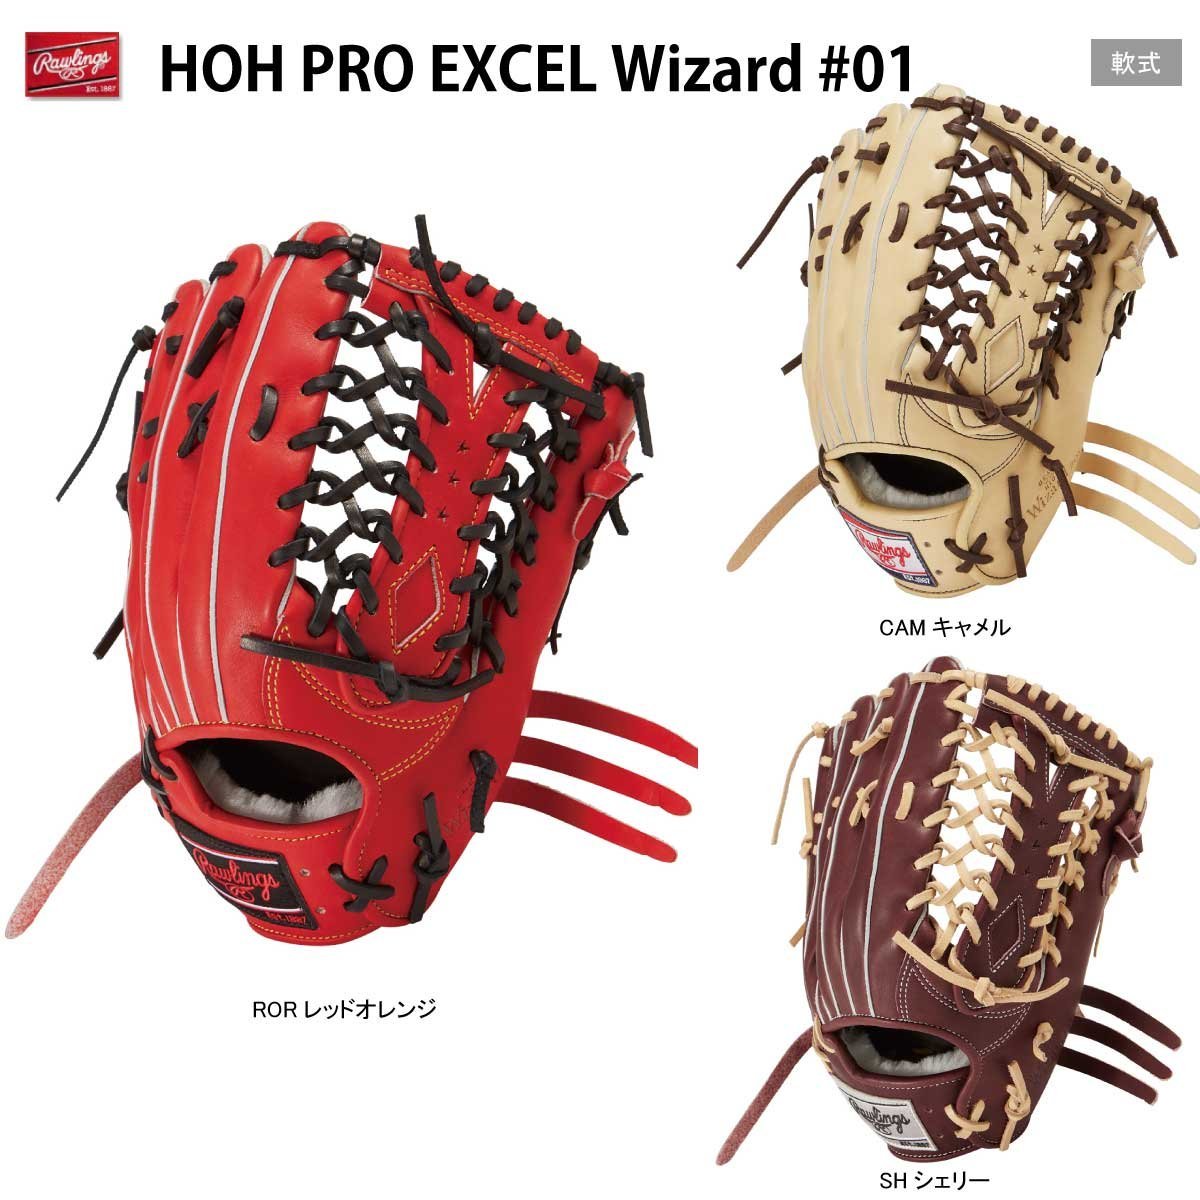 1445640-Rawlings/一般 軟式グラブ HOH PRO EXCEL Wizard #01 